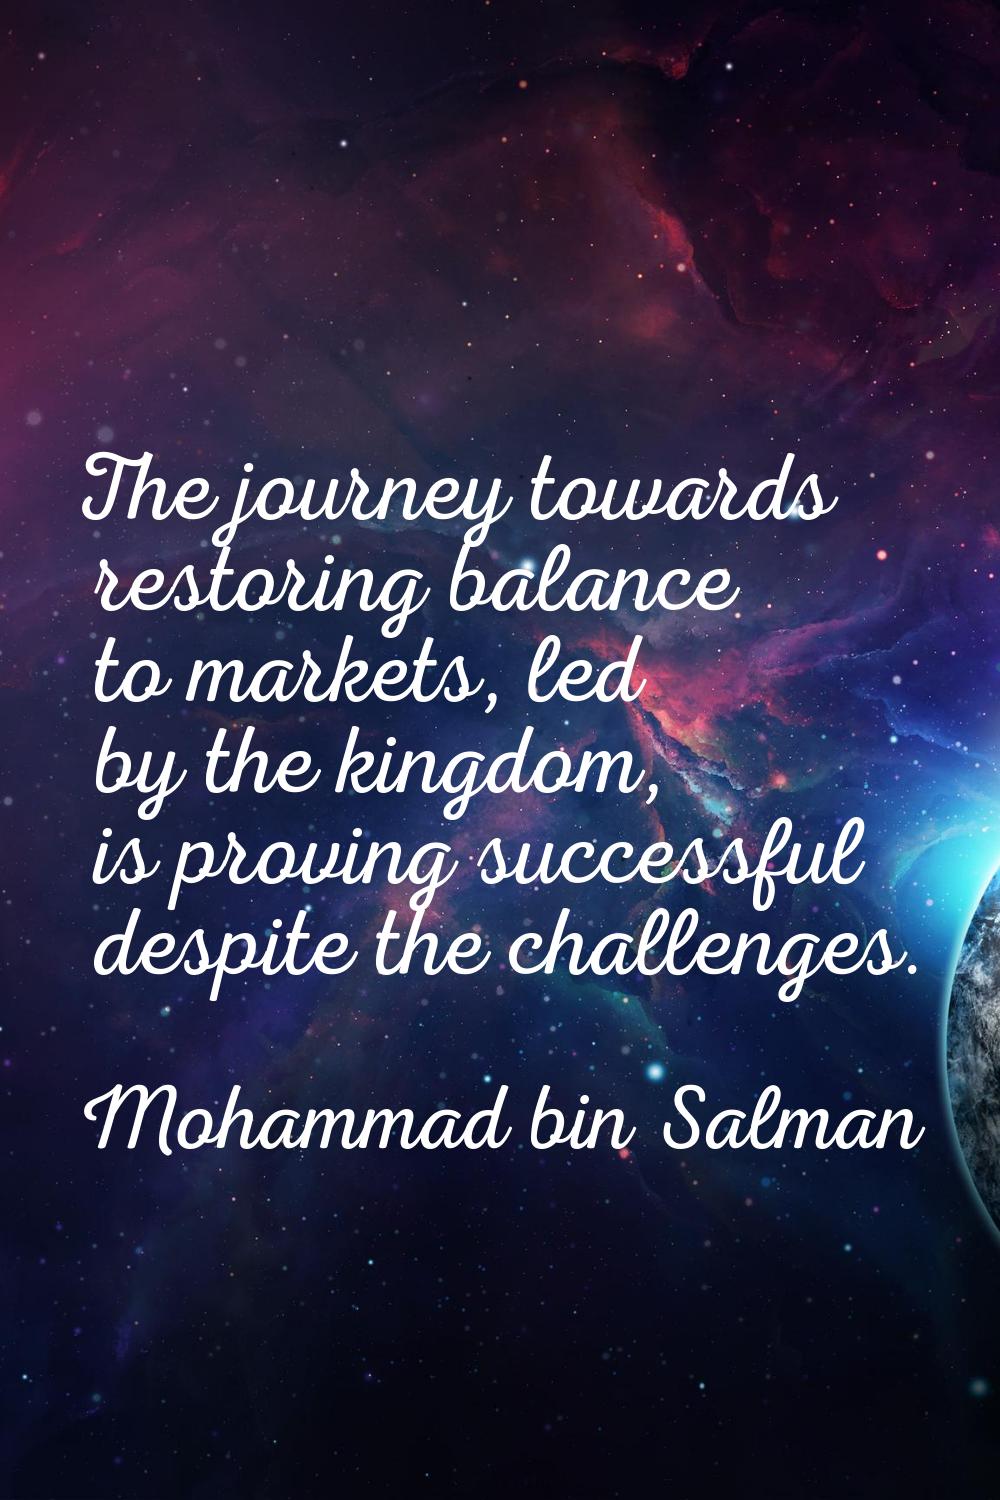 The journey towards restoring balance to markets, led by the kingdom, is proving successful despite